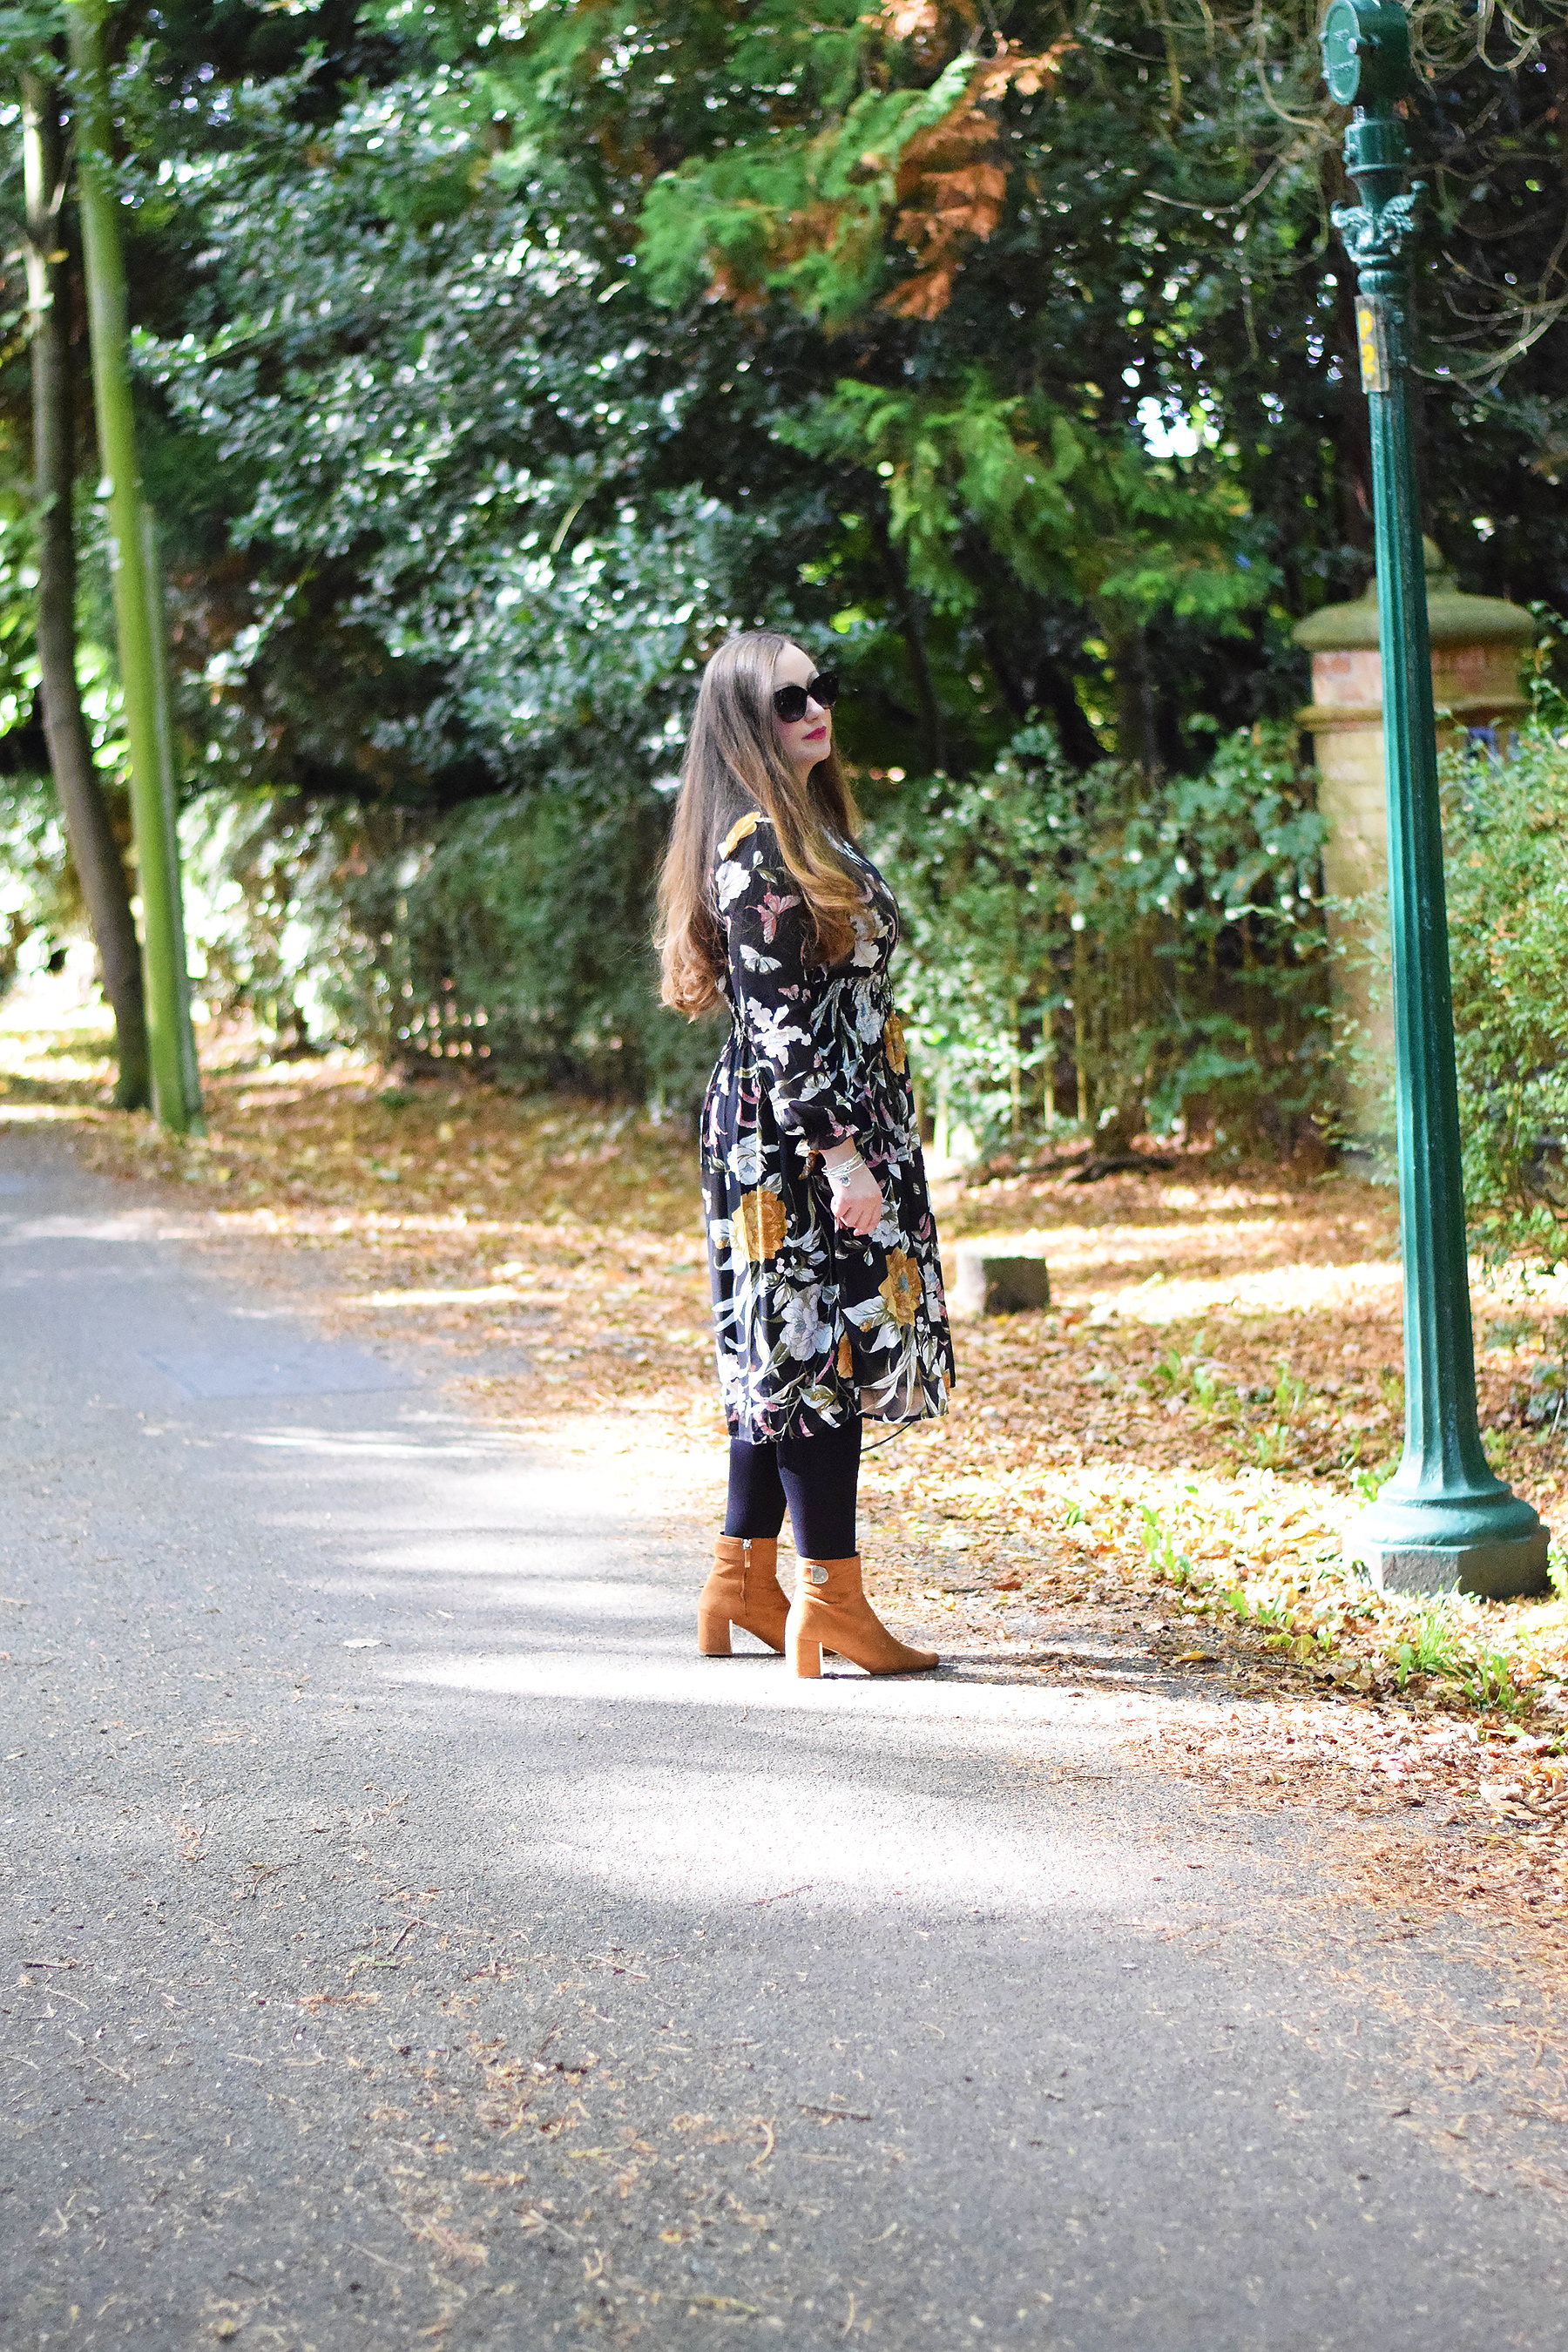 How to wear a floral dress in the autumn